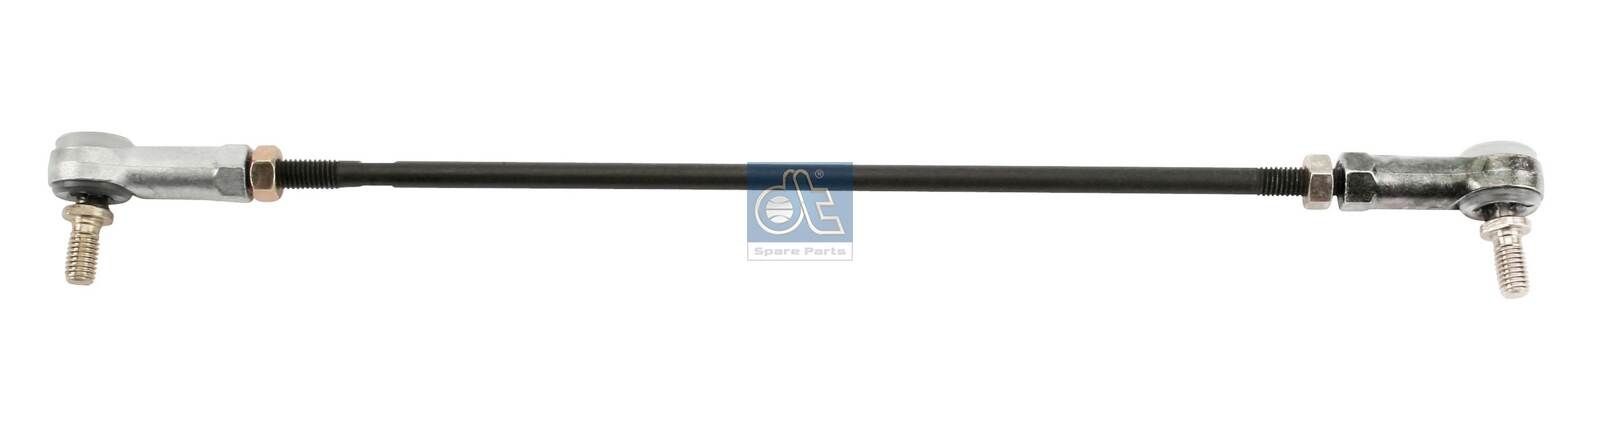 DT Spare Parts Rear Axle Left, Rear Axle Right, 354mm Length: 354mm Drop link 2.61238 buy